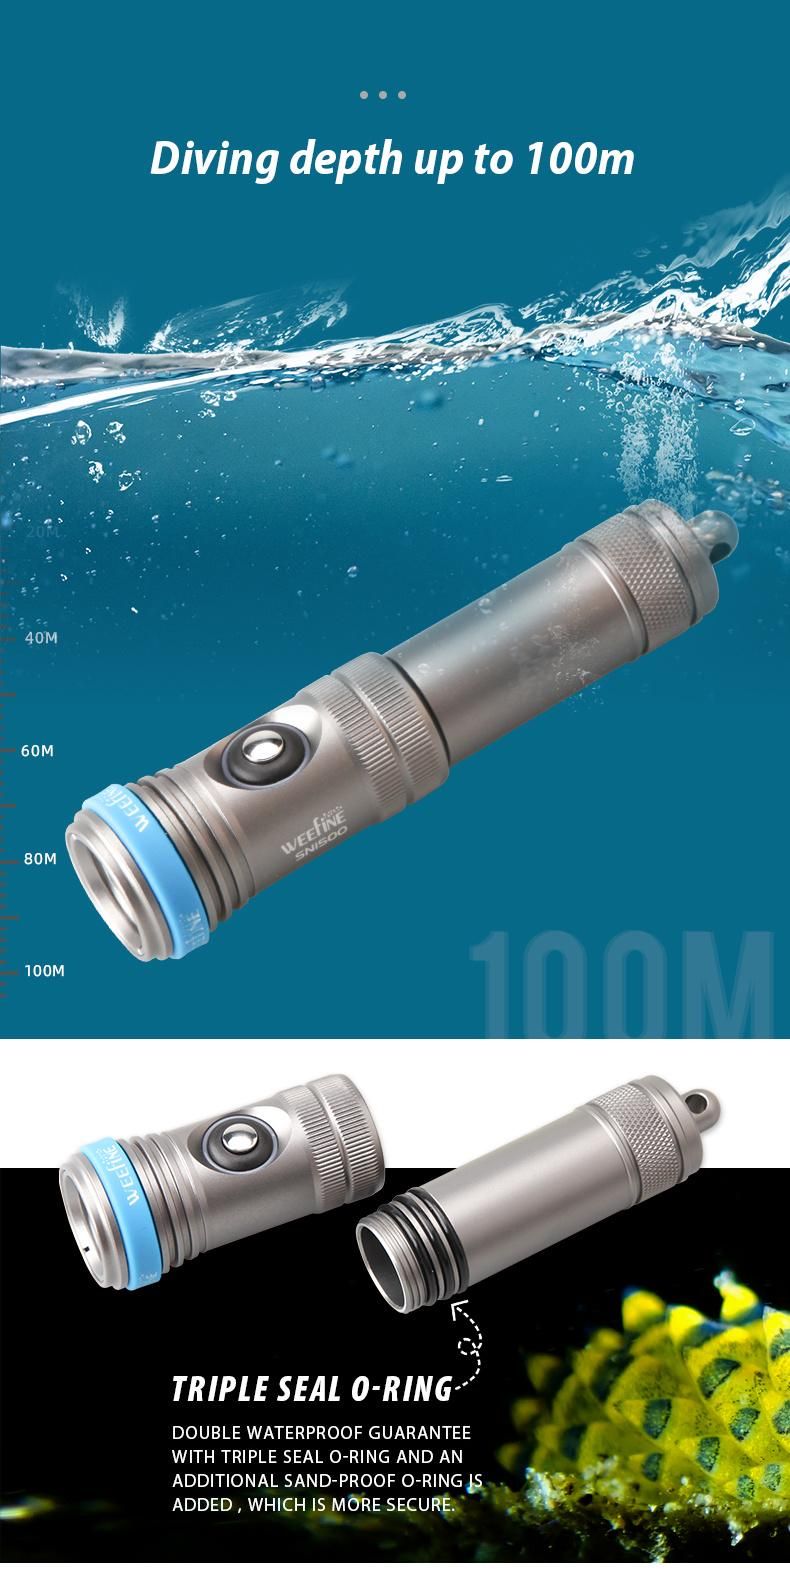 Smart Innovative Patented Long Lasting Diving Torch with Built-in Overheat Protection Circuit